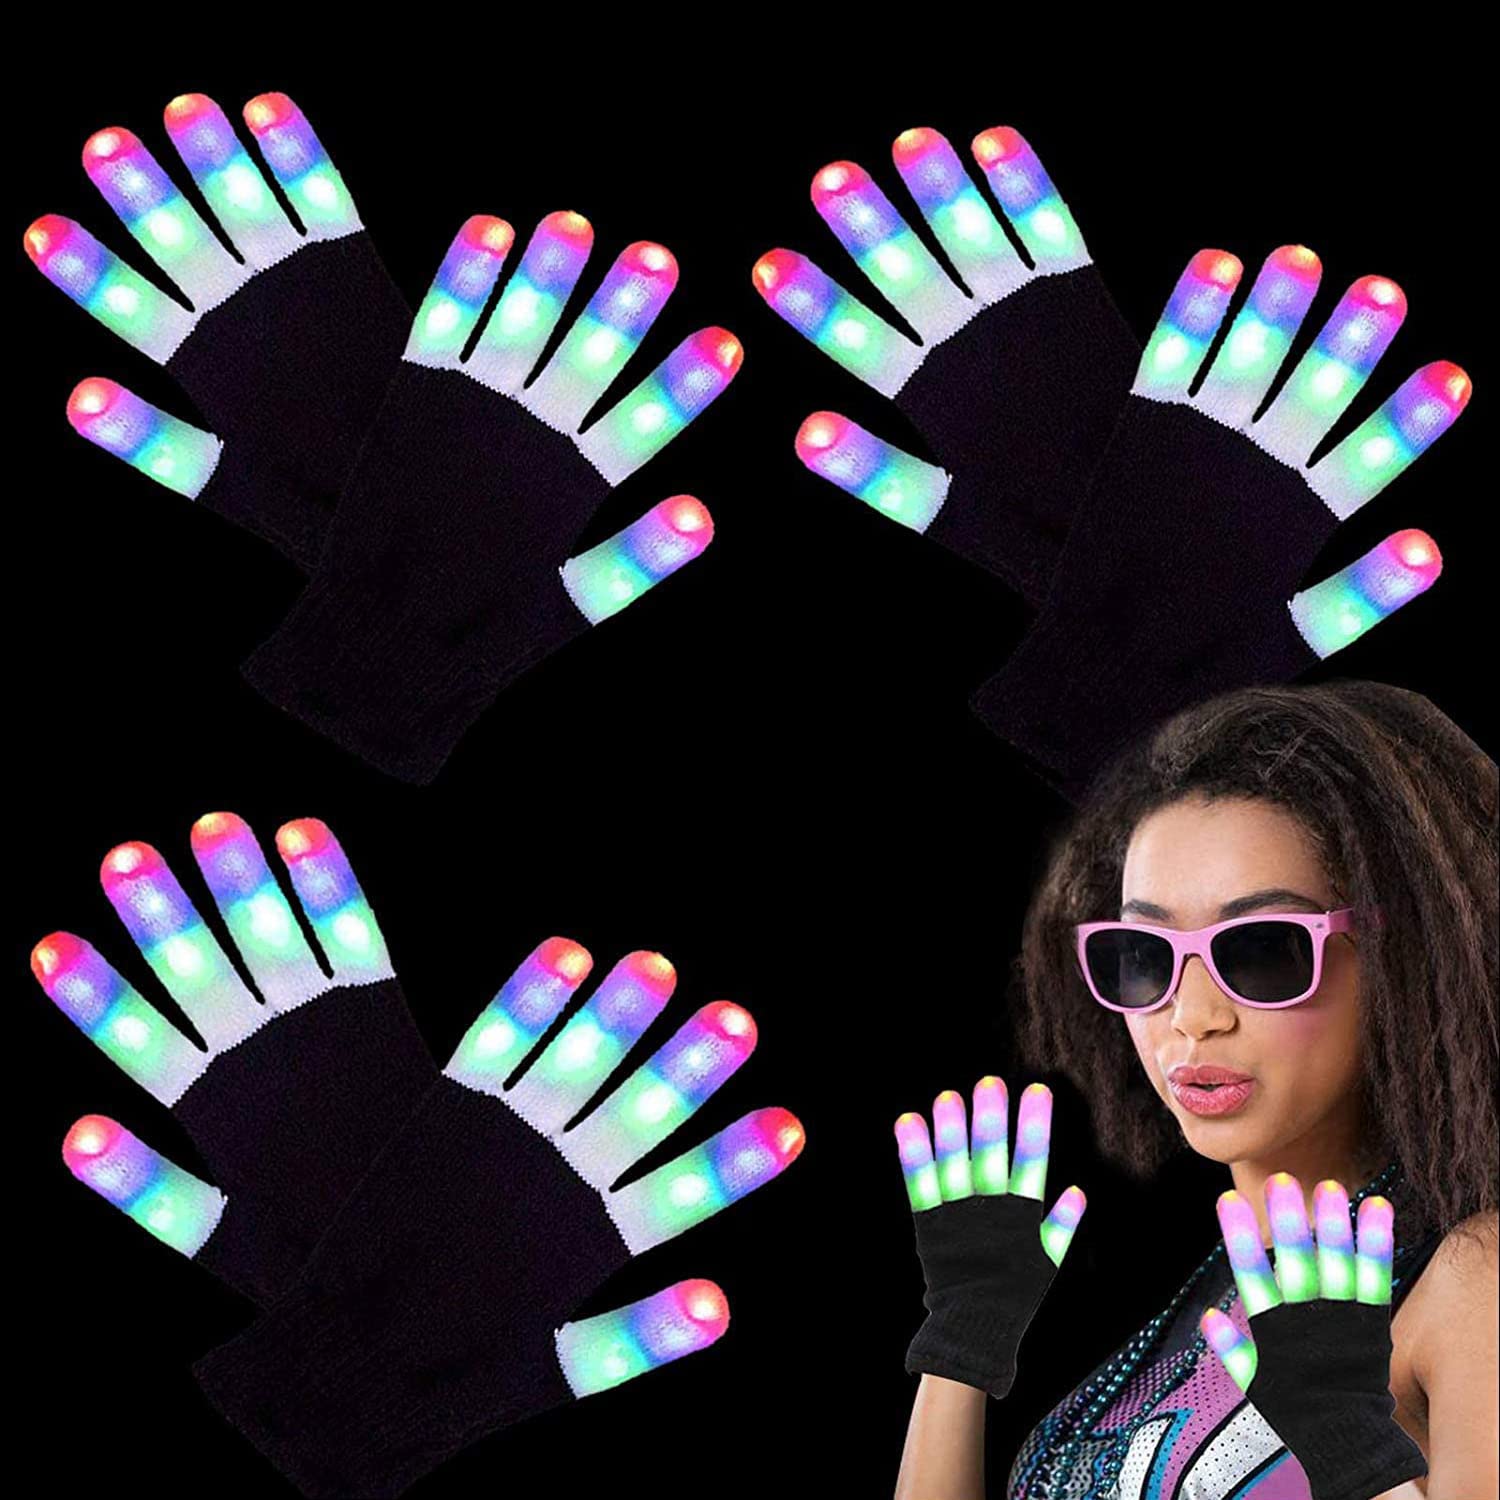 Glowing LED Gloves That Will Transform Your Next Rave 111855 - Glowing LED Gloves That Will Transform Your Next Rave